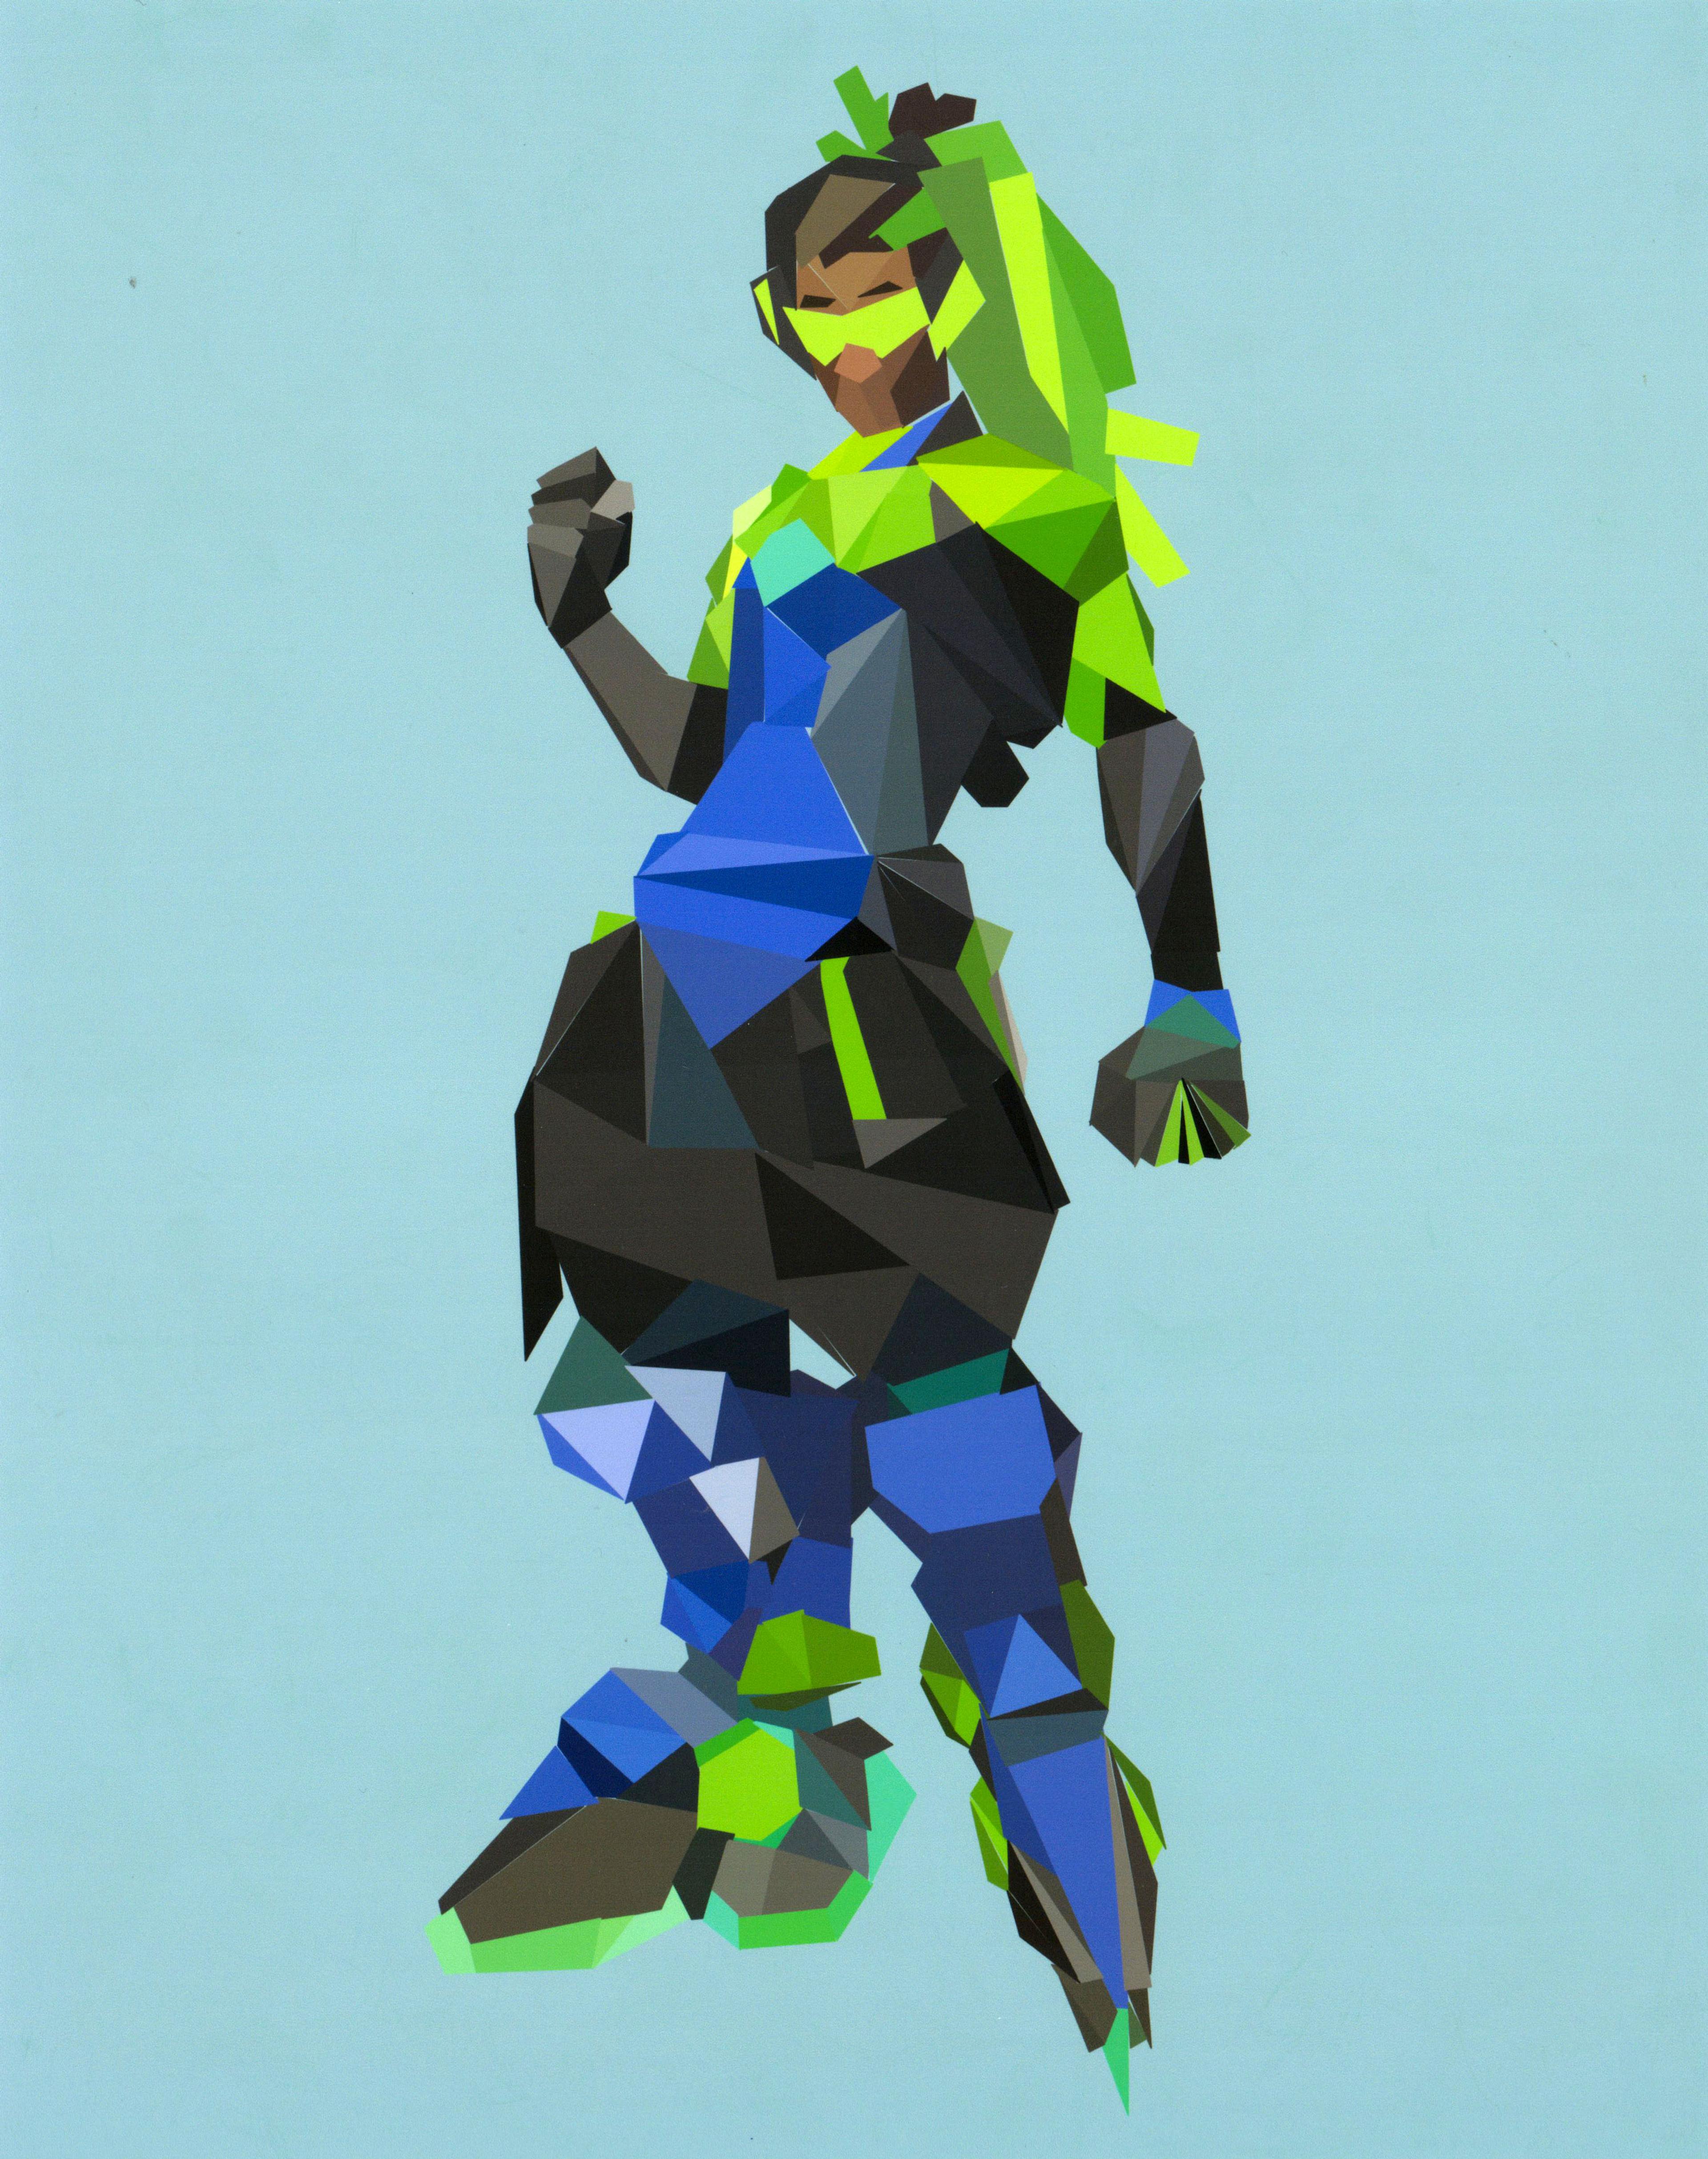 Digital illustration of a Black male figure standing in a hero pose with his right elbow curved and fist raised, staring at the viewer. The figure is abstract and composed entirely of geometric shapes. He wears black pants and long blue boots with yellow-green accents on the feet. He wears a black shirt with a blue tunic on the chest. He has long, yellow-green hair and fluorescent yellow sunglasses. He stands in front of a pale blue background.